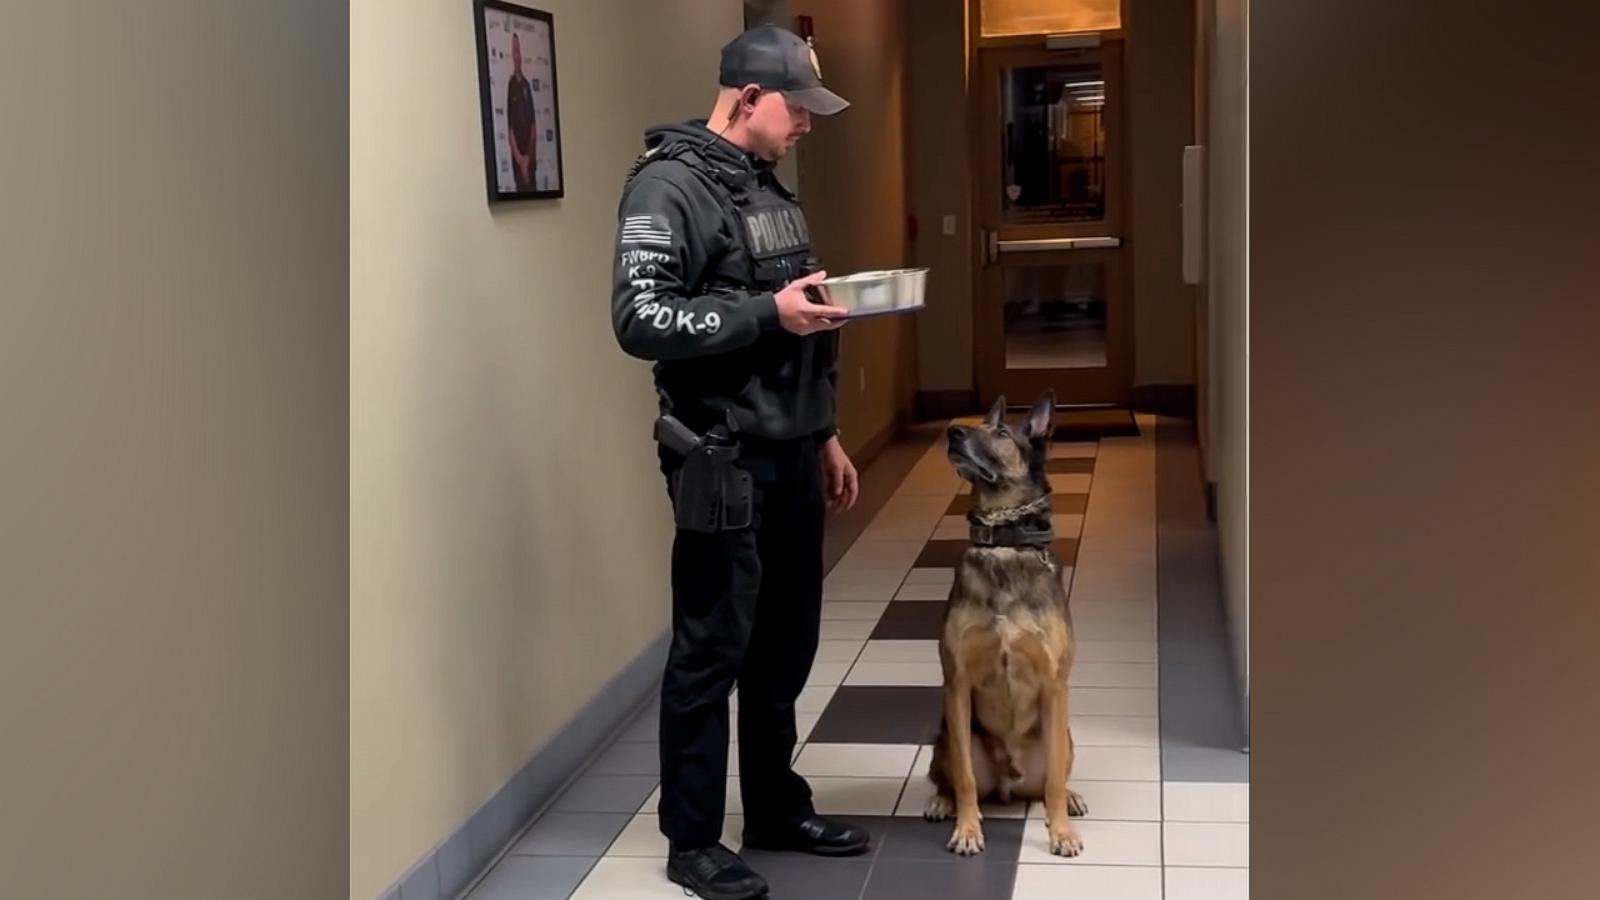 VIDEO: Watch this retiring police K-9 get rewarded with a bowl of whipped cream